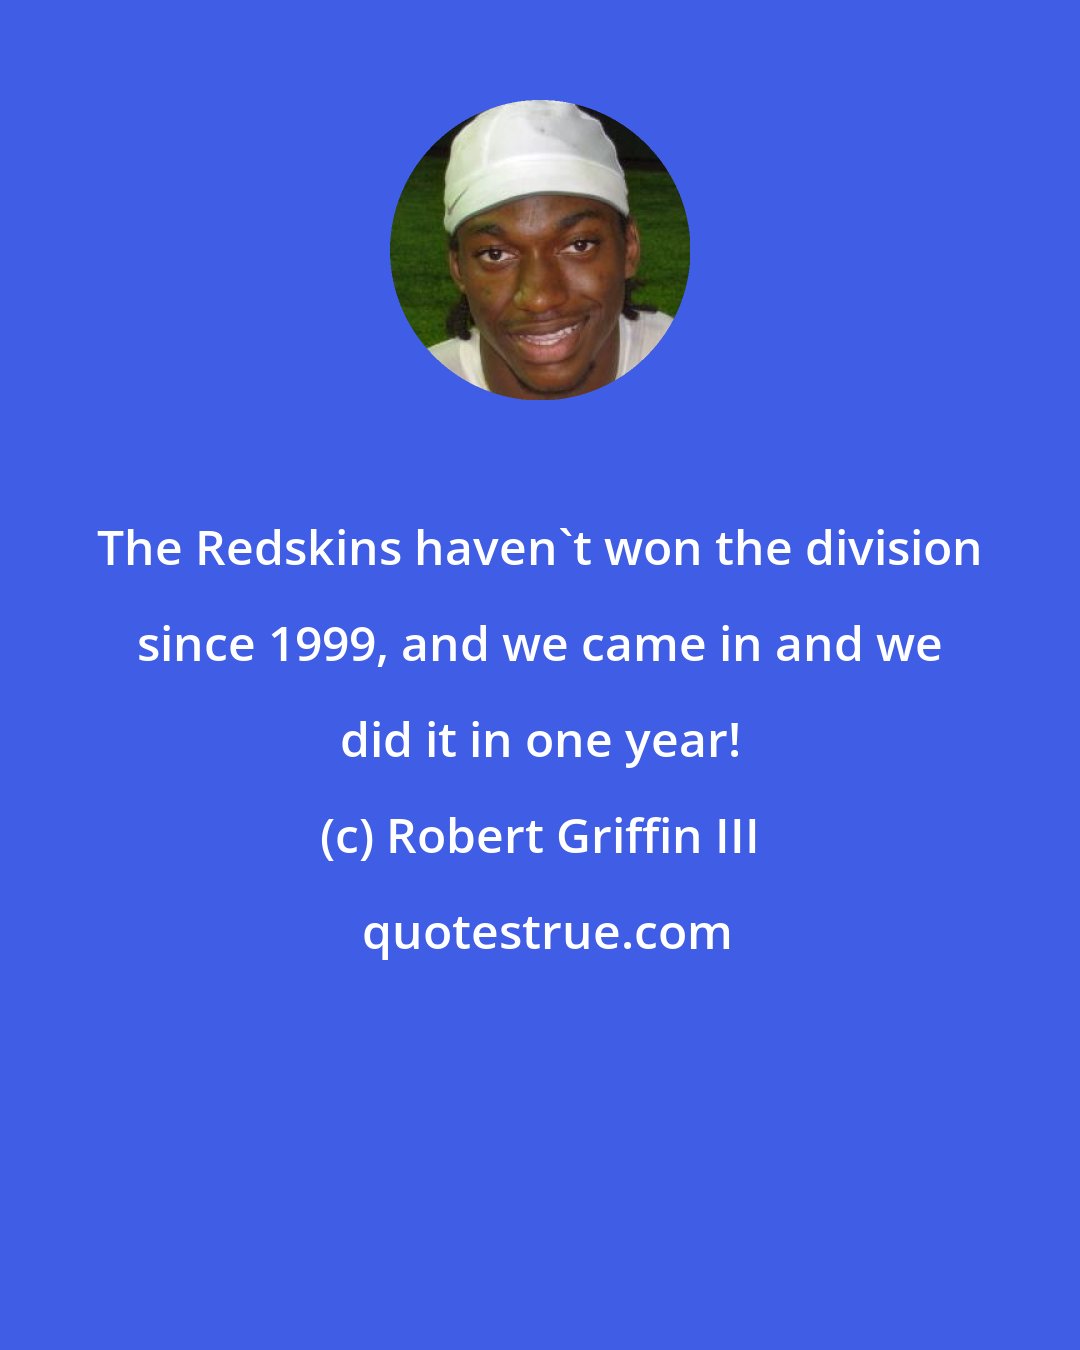 Robert Griffin III: The Redskins haven't won the division since 1999, and we came in and we did it in one year!